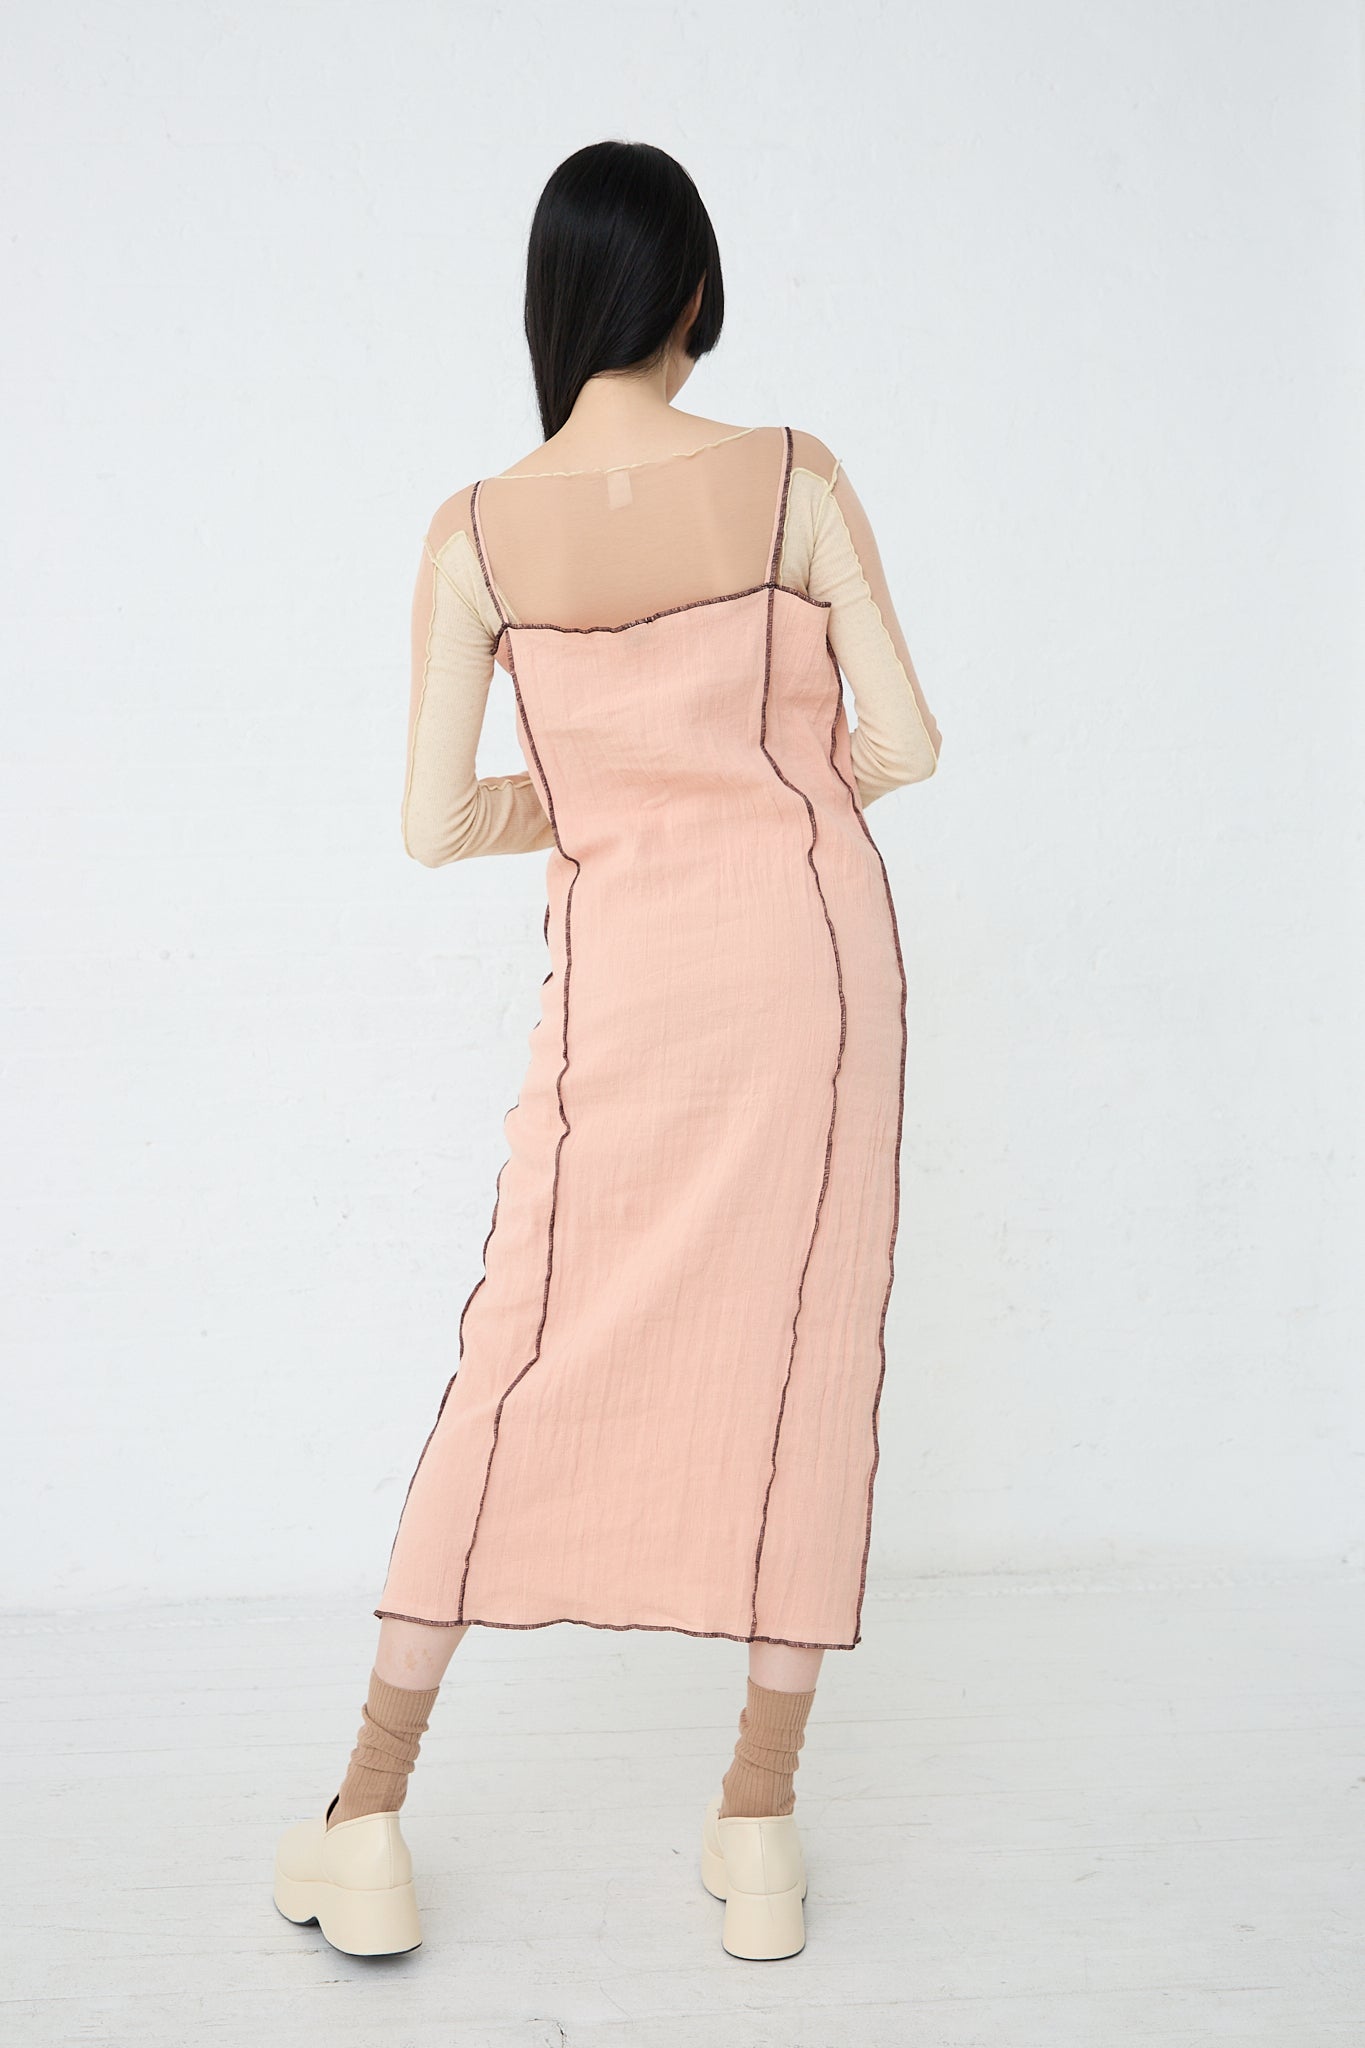 A sustainable Linen and Cotton Shok Slip Dress in Rose made by Baserange, showcasing the back of a woman in a pink dress. Back view.